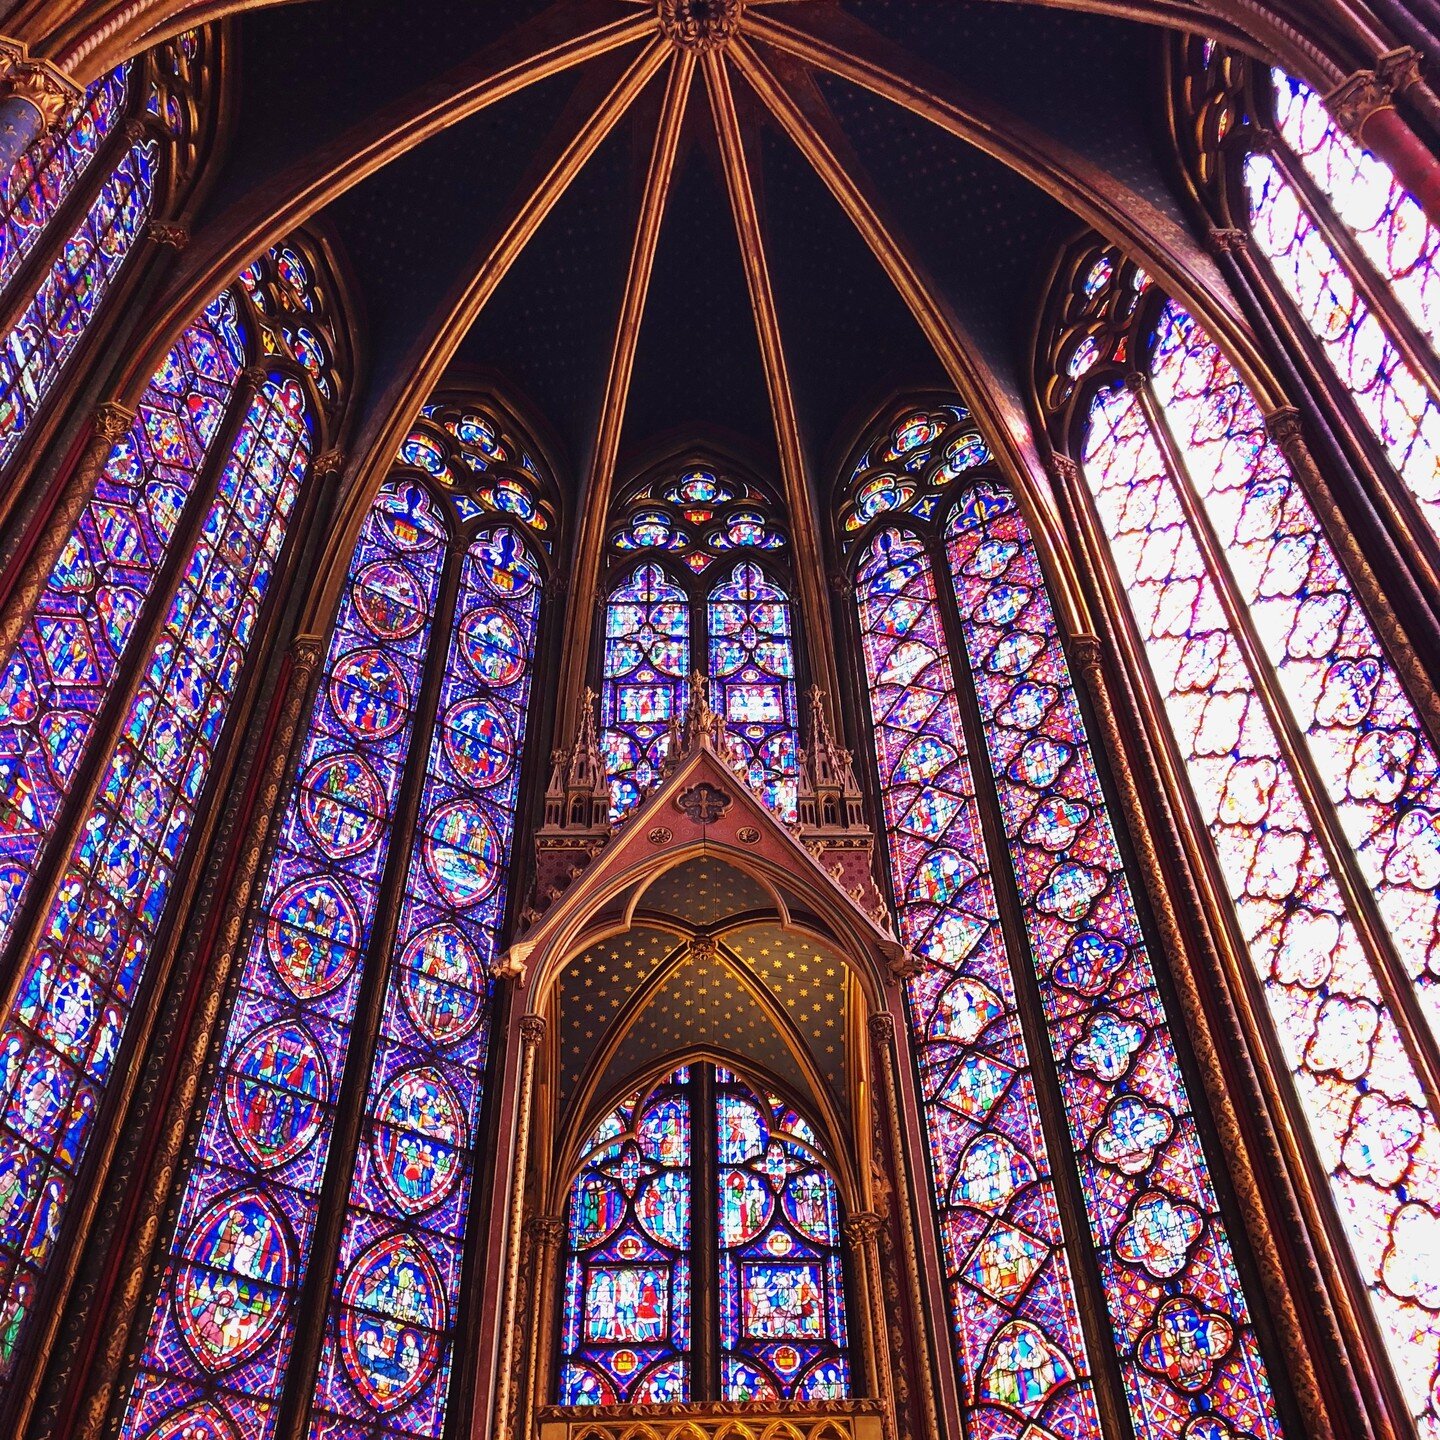 Going over Gothic architecture in our Costume and Decor class, and we talked about my favorite cathedral, Saint-Chapelle. So now I am feeling very nostalgic for my 2018 study abroad trip, and I am looking through my photos, just reminiscing. Still on